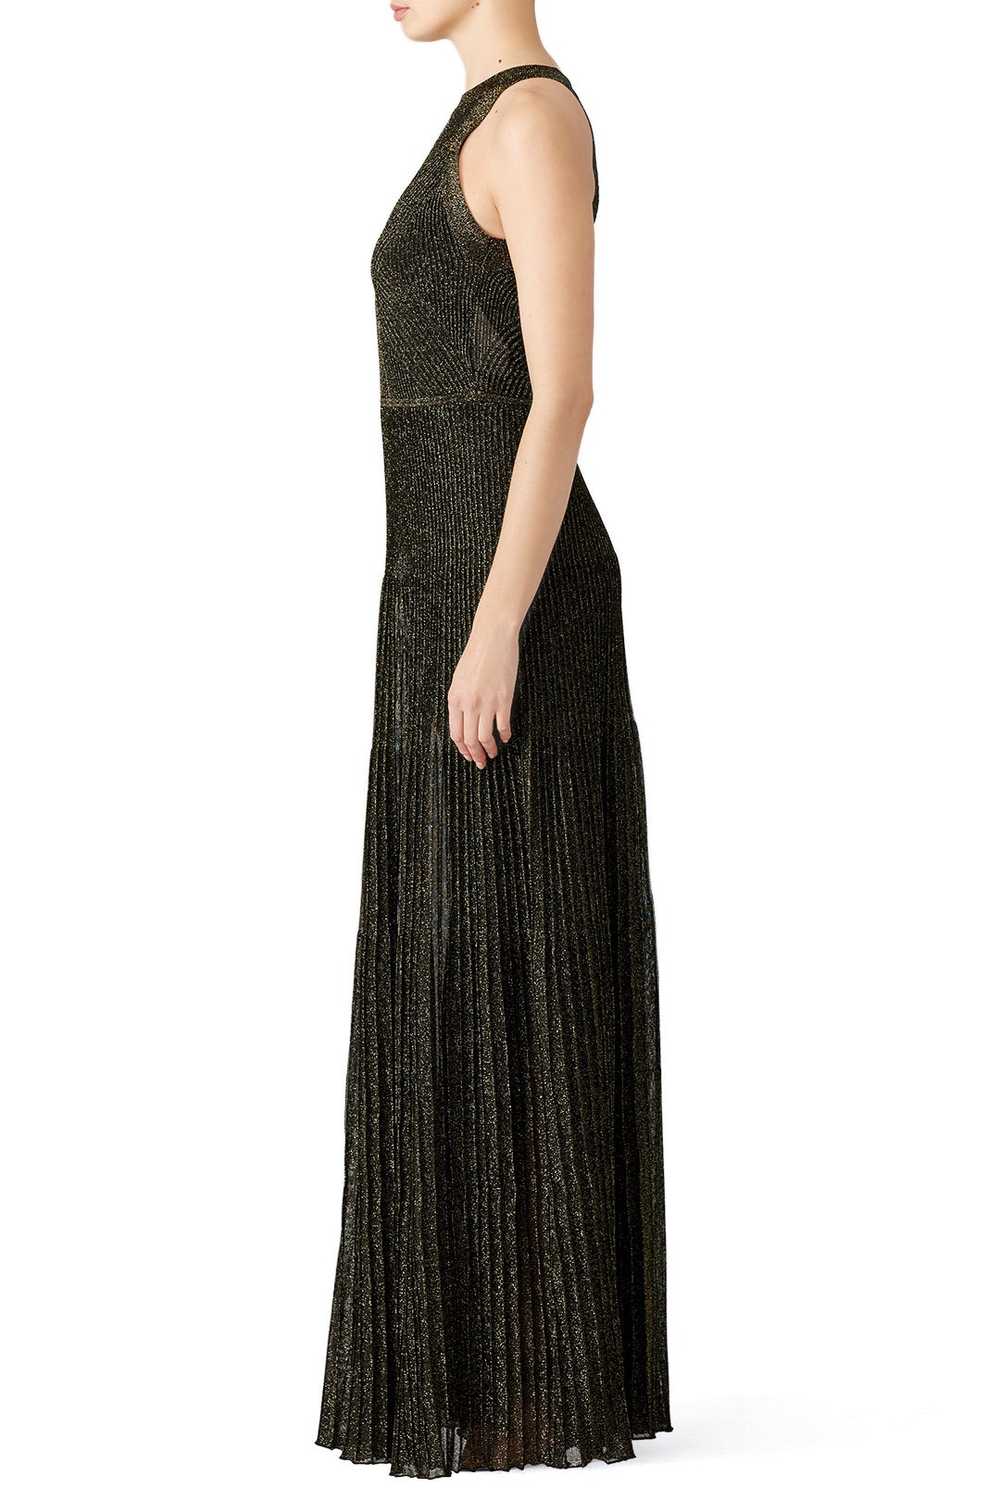 Vionnet Black and Gold Knit Gown - image 3